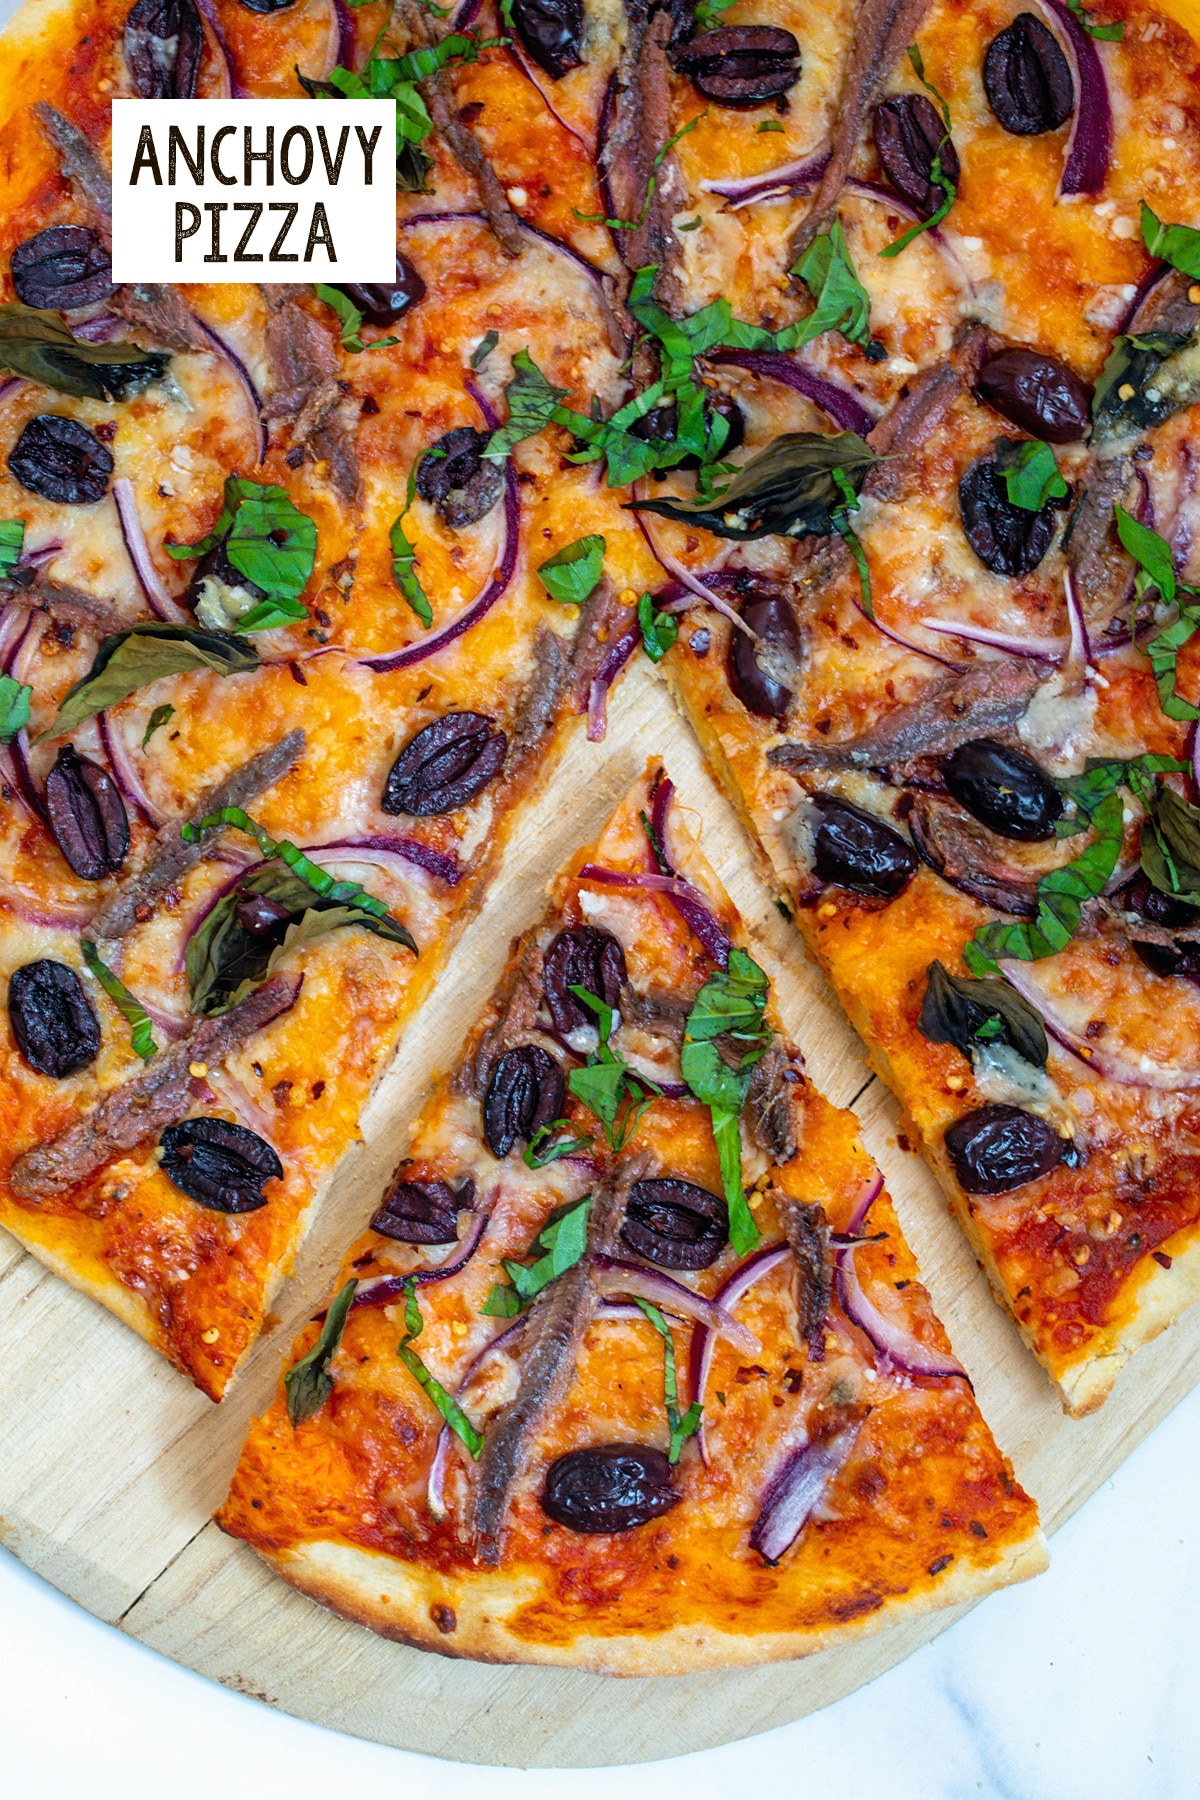 Overhead view of a pizza with anchovies, tomato sauce, red onion, black olives, and basil with a slice pulled out from rest of pizza and recipe title at top.